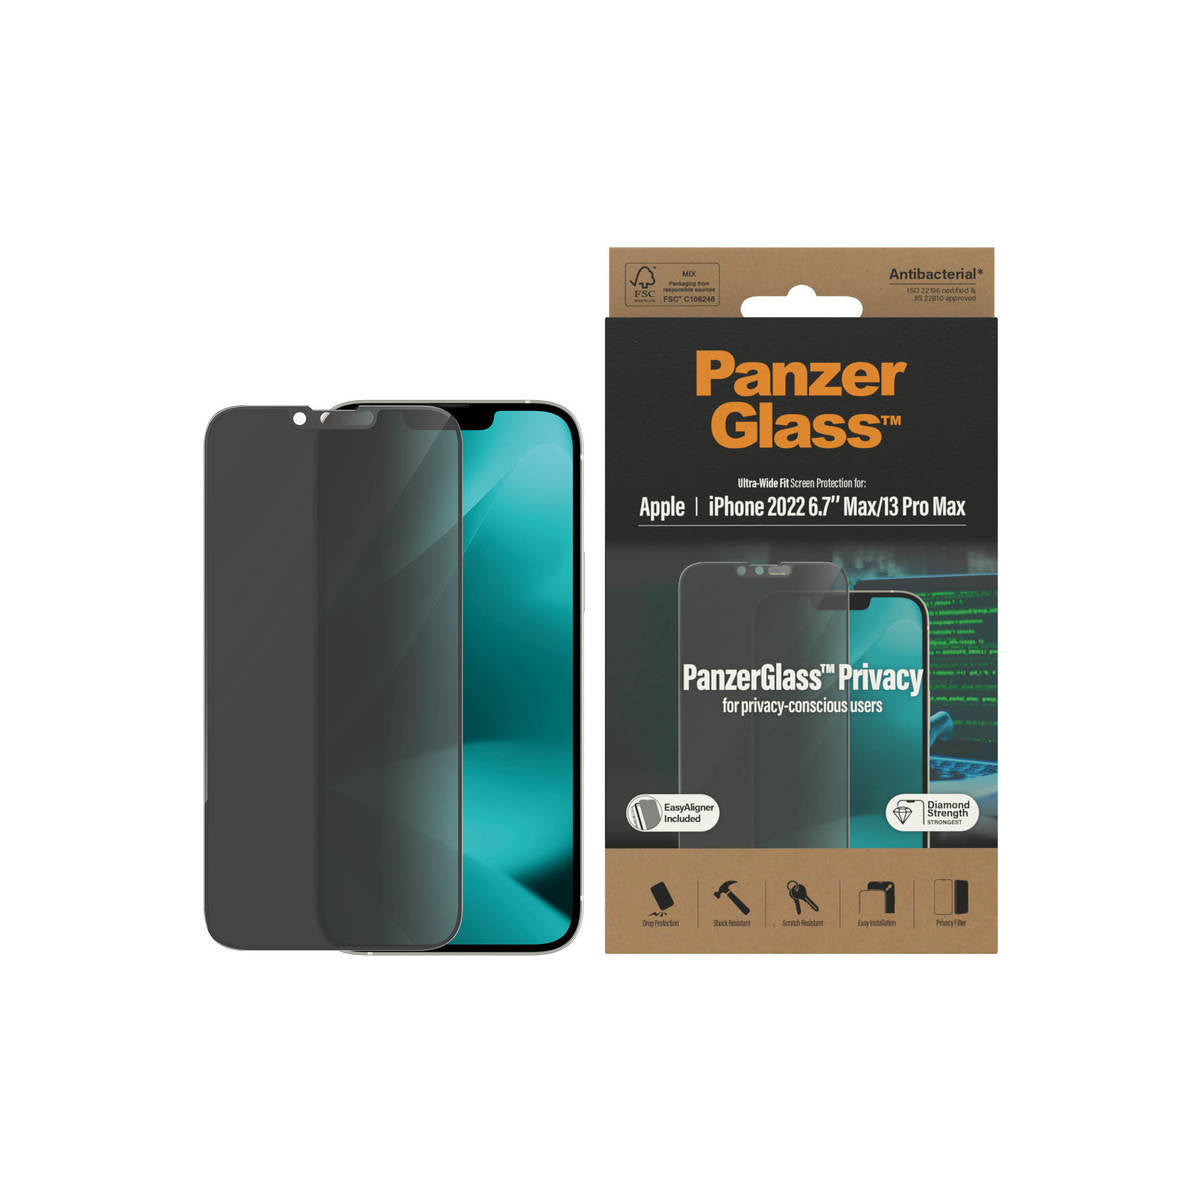 PanzerGlass Ultra-Wide Fit Privacy Antibacterial Screen Protector for iPhone 14 Plus.